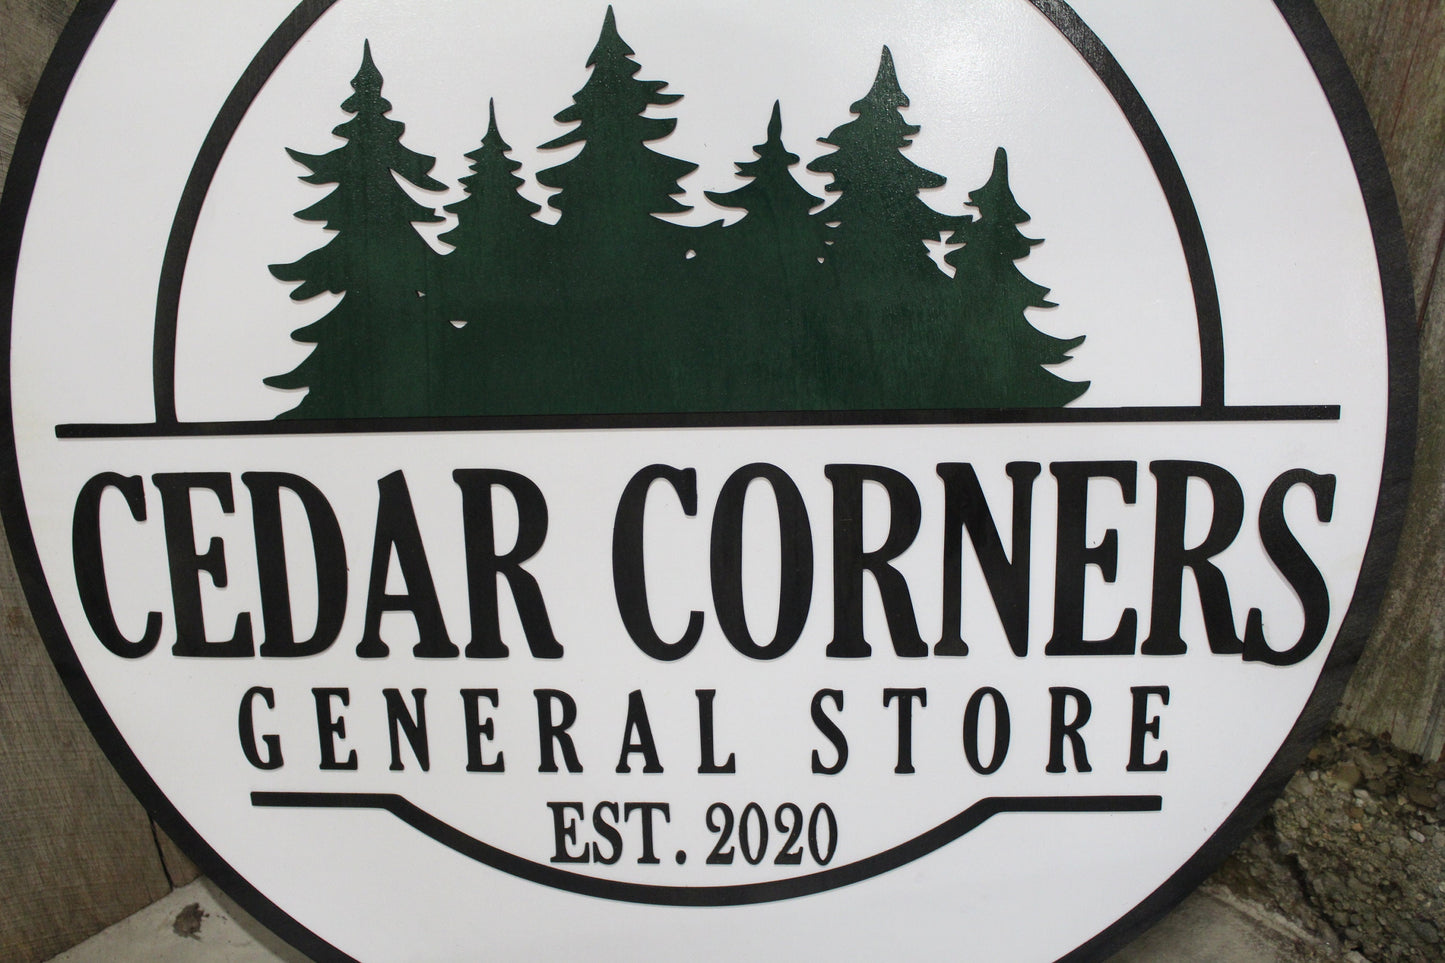 General Store Sign Small Business Round Sign Raised Text Commercial Signage 3D Your Logo Extra Large Rings Established Pine Trees Custom